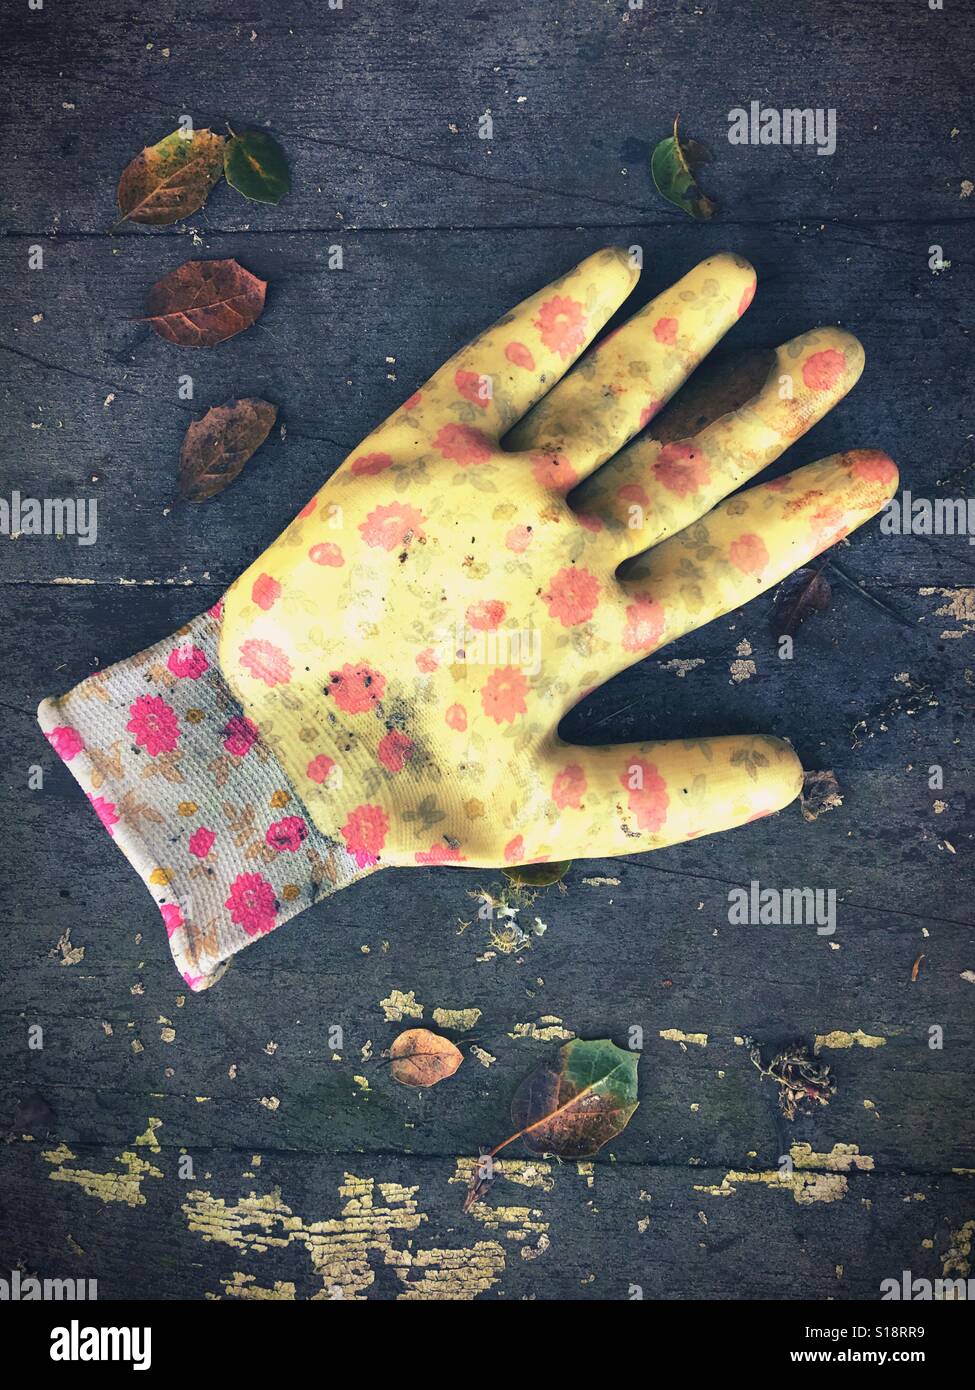 A yellow gardening glove on a distressed wood background with leaves and twigs. Stock Photo